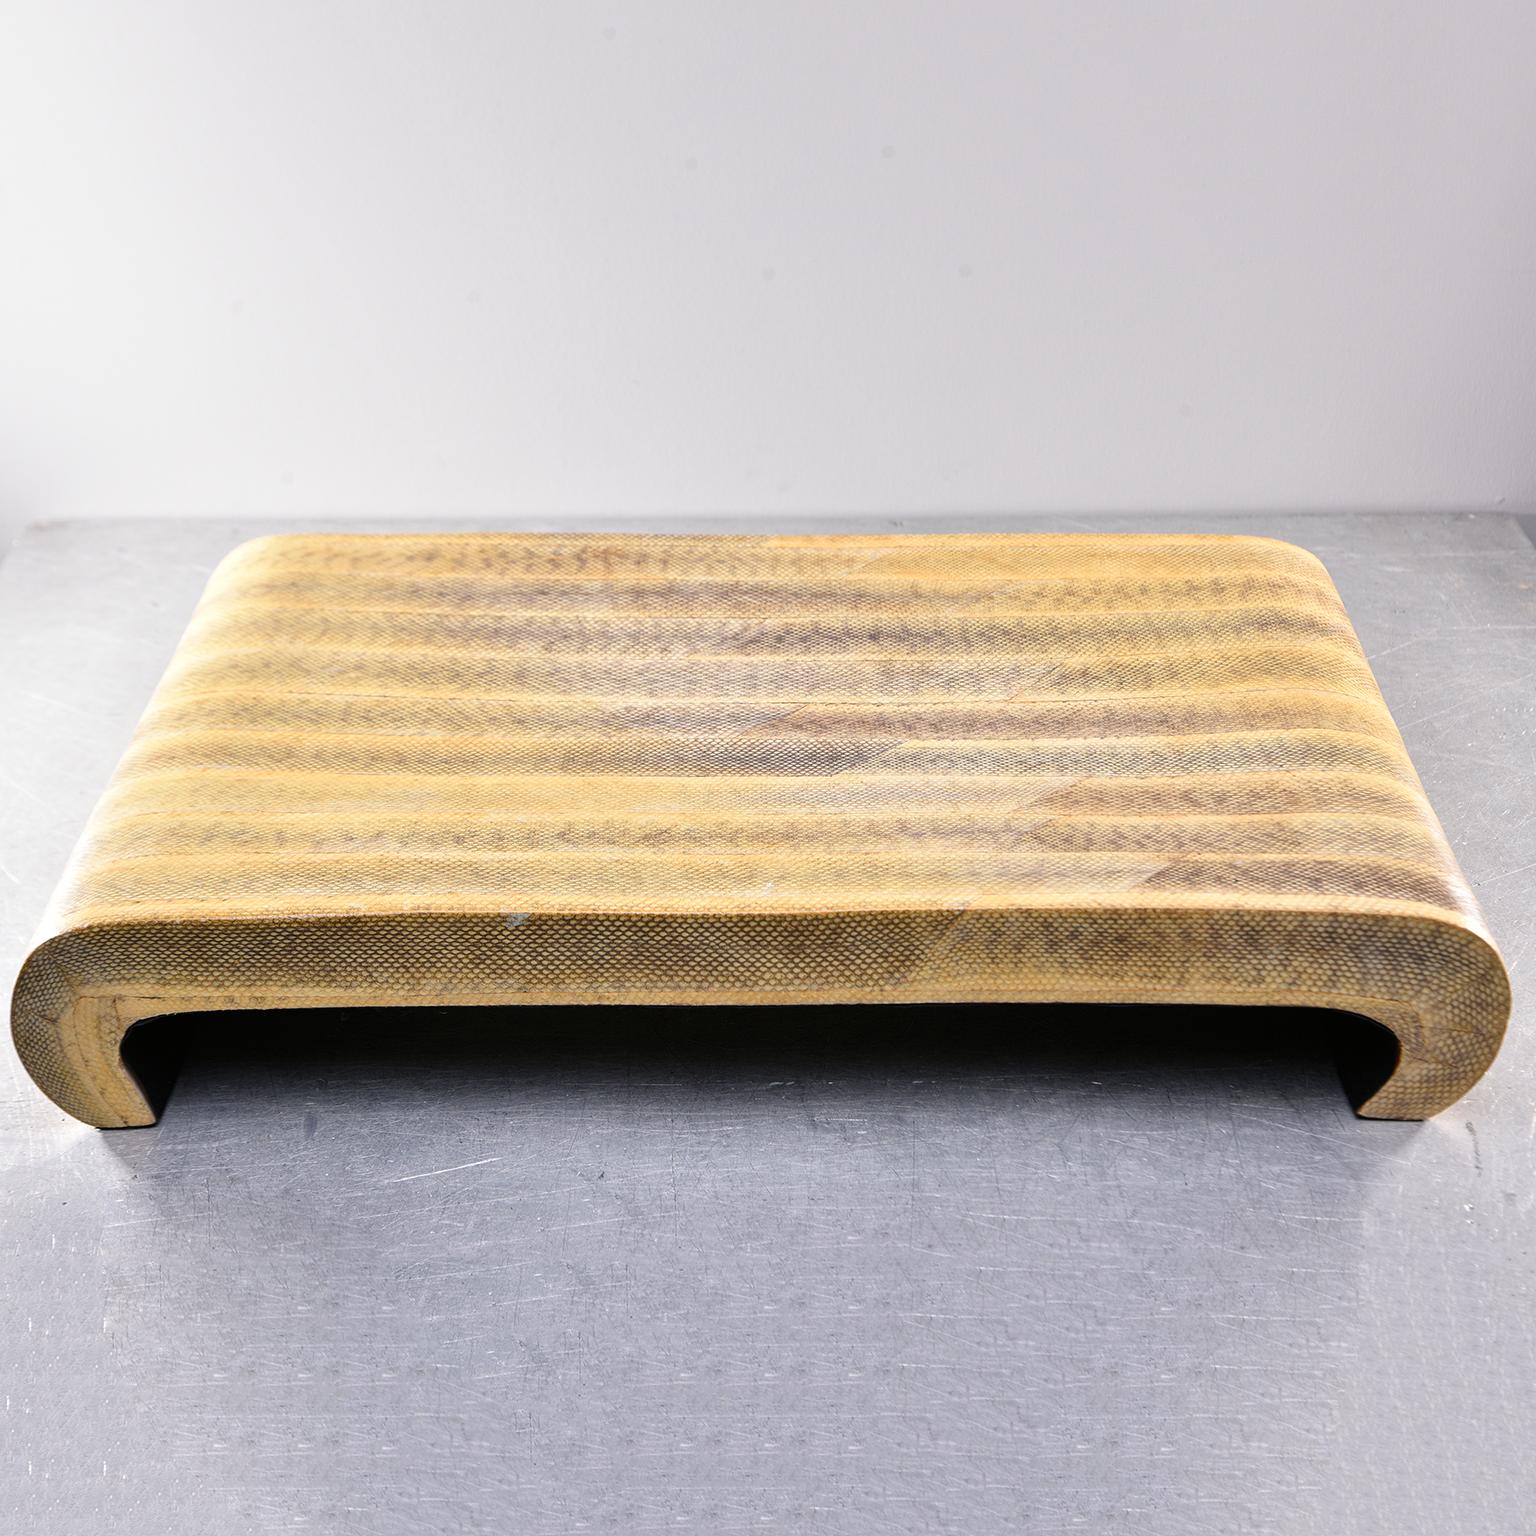 This large platform-style tray is just under two feet wide and features subtly under-curving legs, genuine snakeskin leather that has been hand painted to accentuate the color and pattern. New item handmade in Italy.